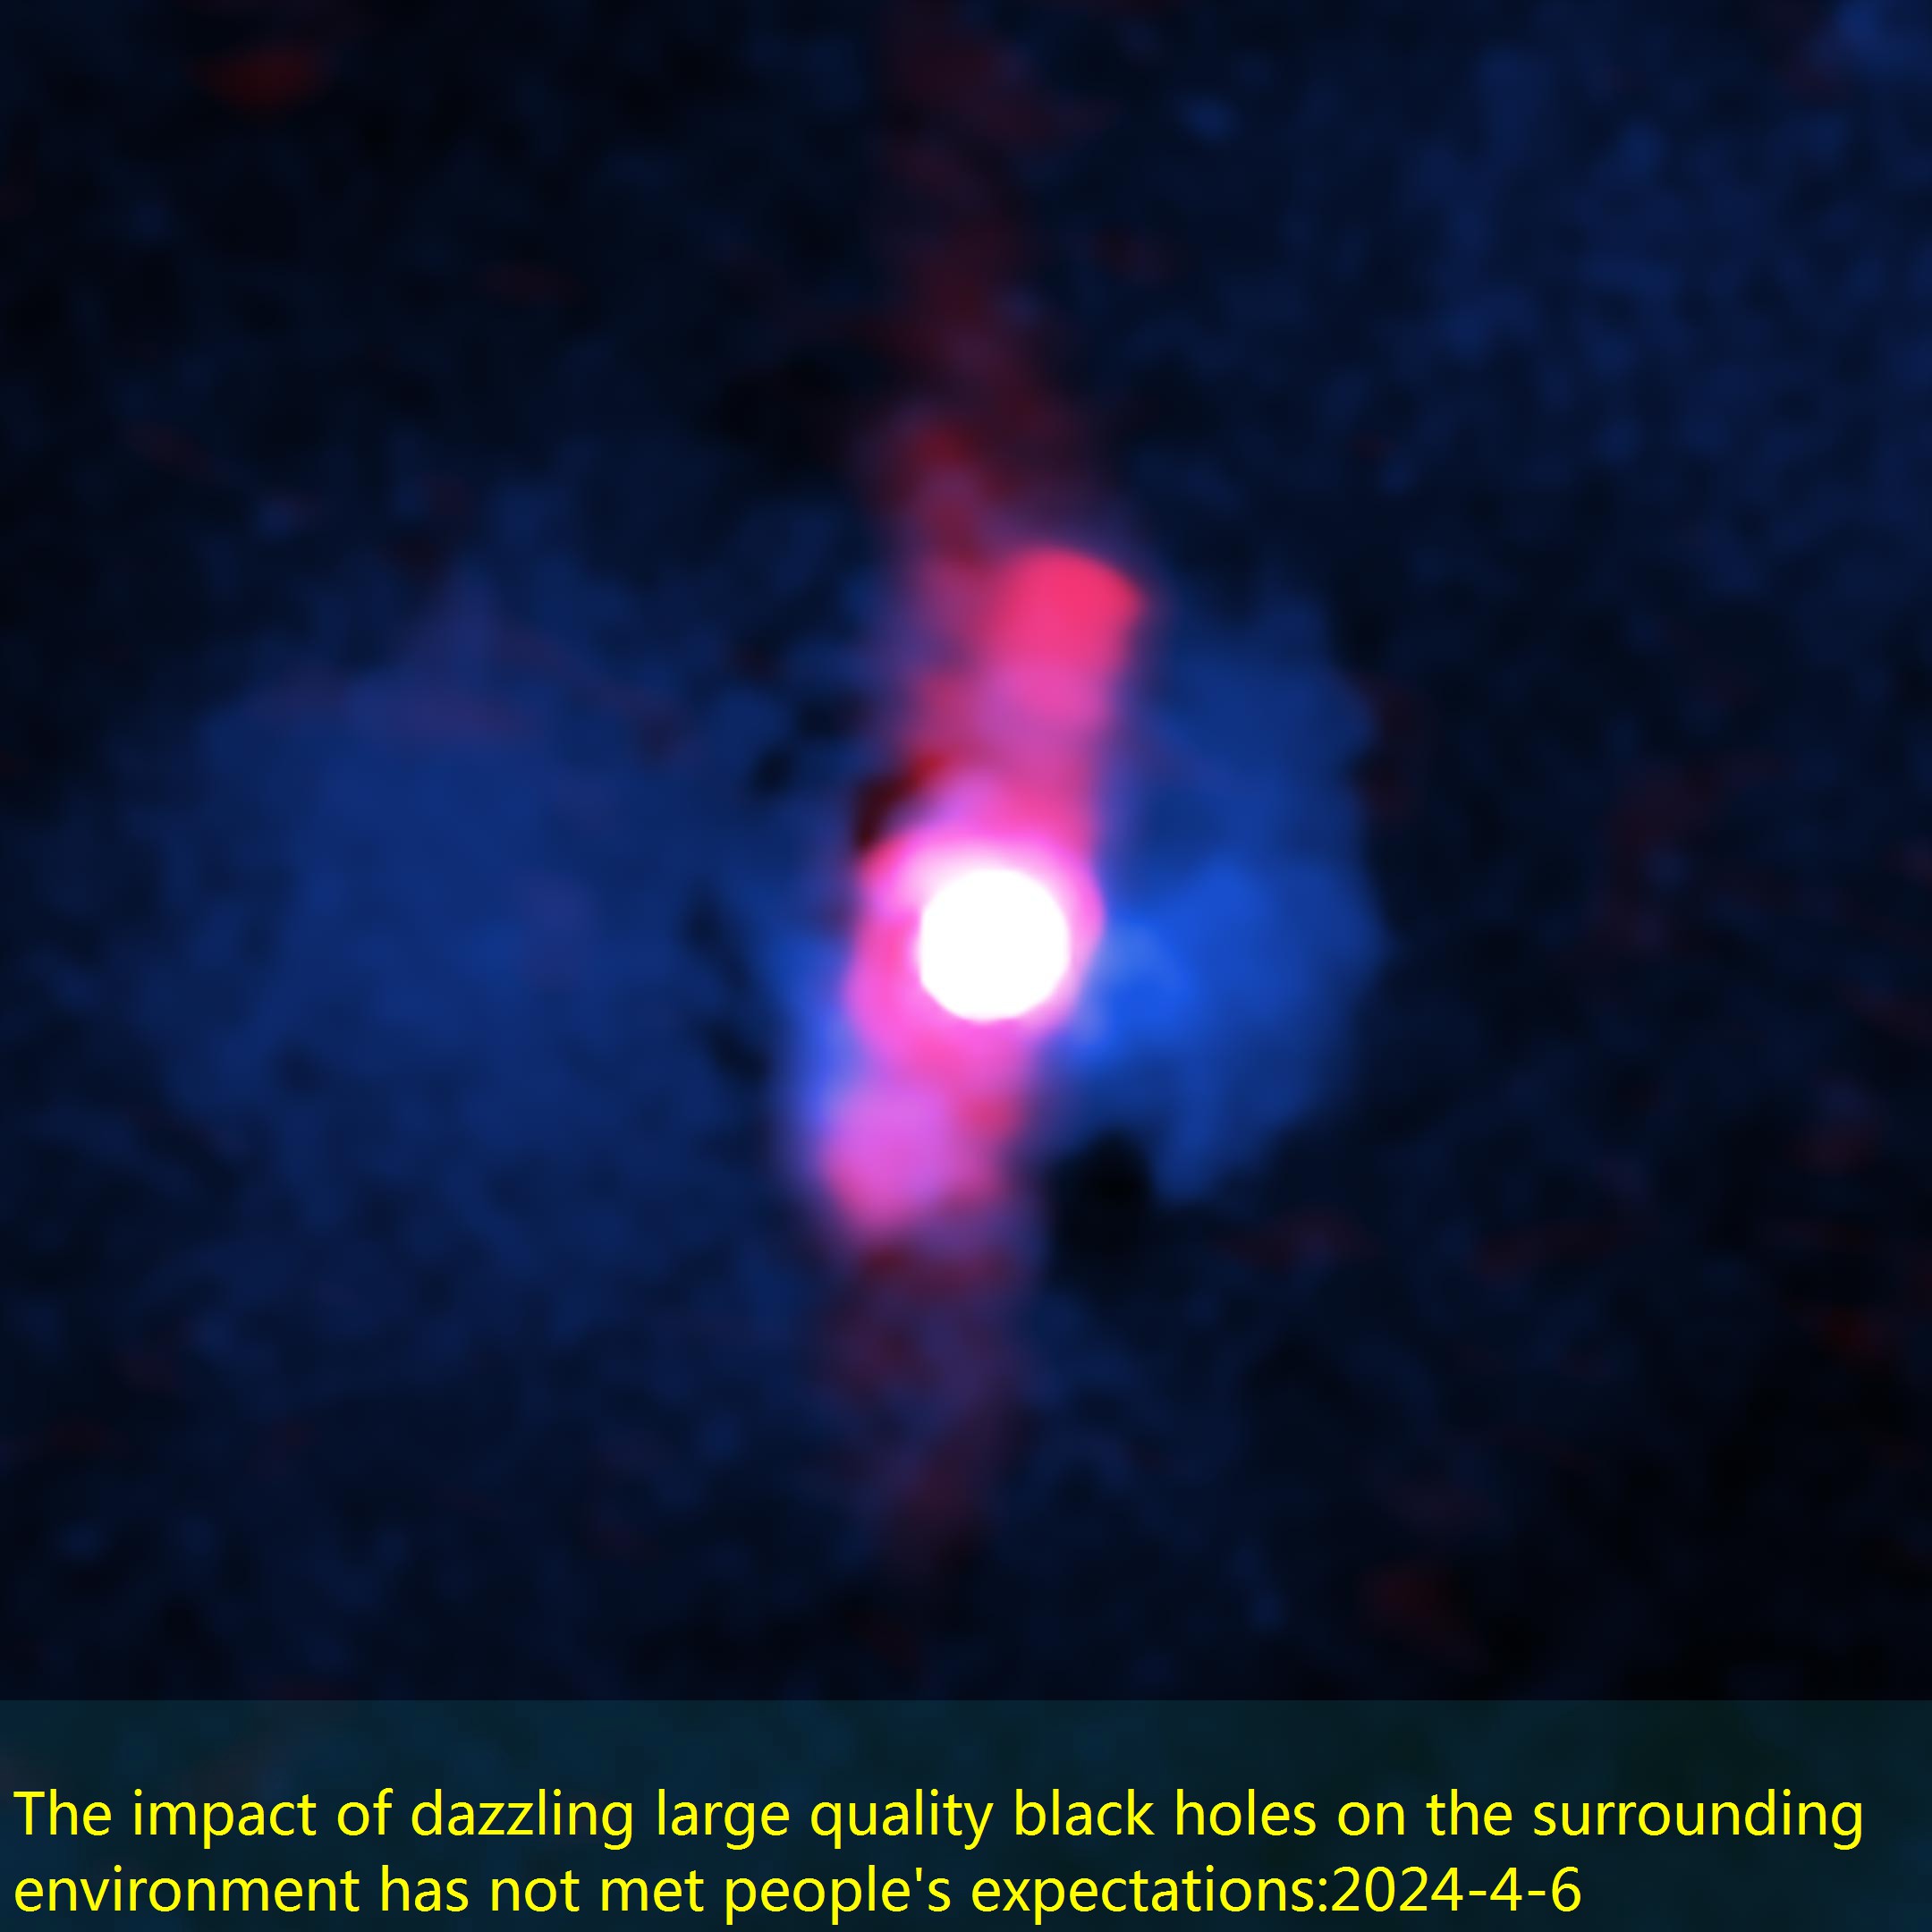 The impact of dazzling large quality black holes on the surrounding environment has not met people’s expectations